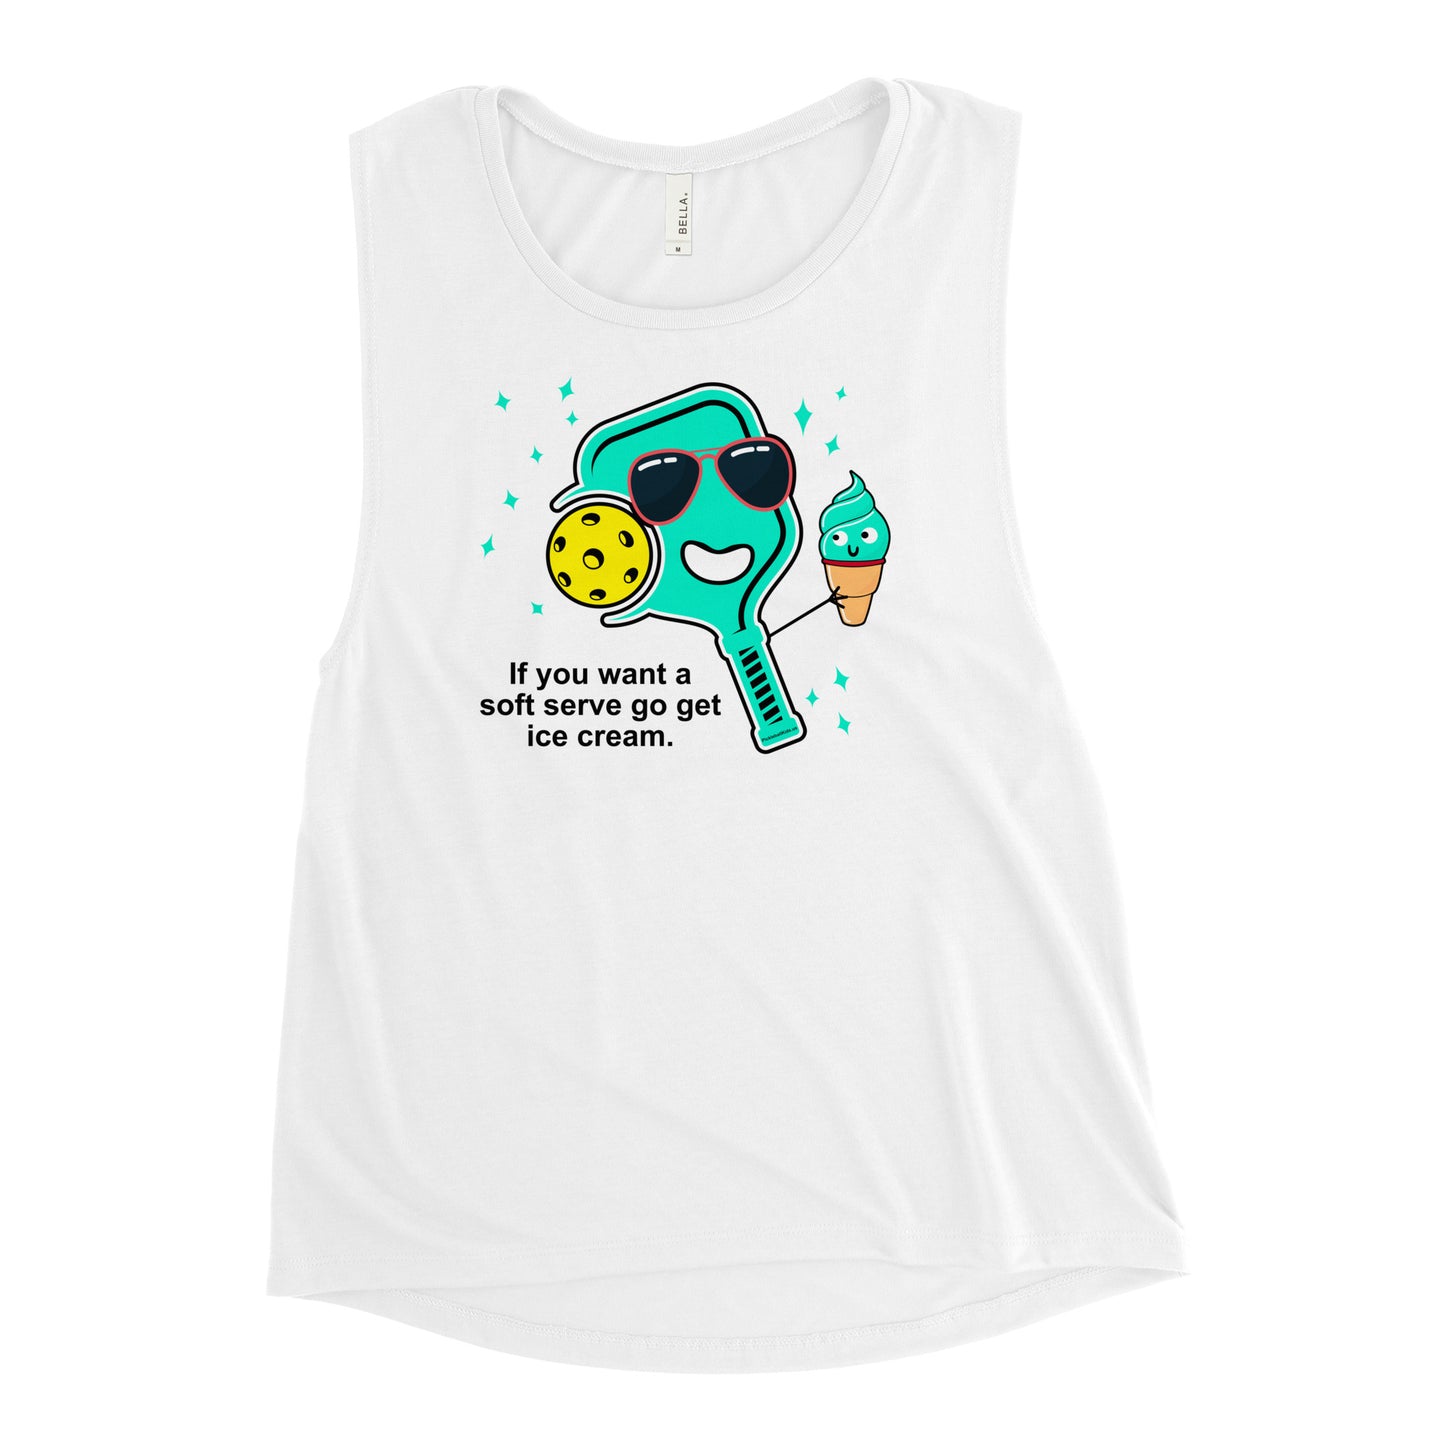 Ladies’ Pickleball Muscle Tank, "If You Want A Soft Serve Go Get Ice Cream."